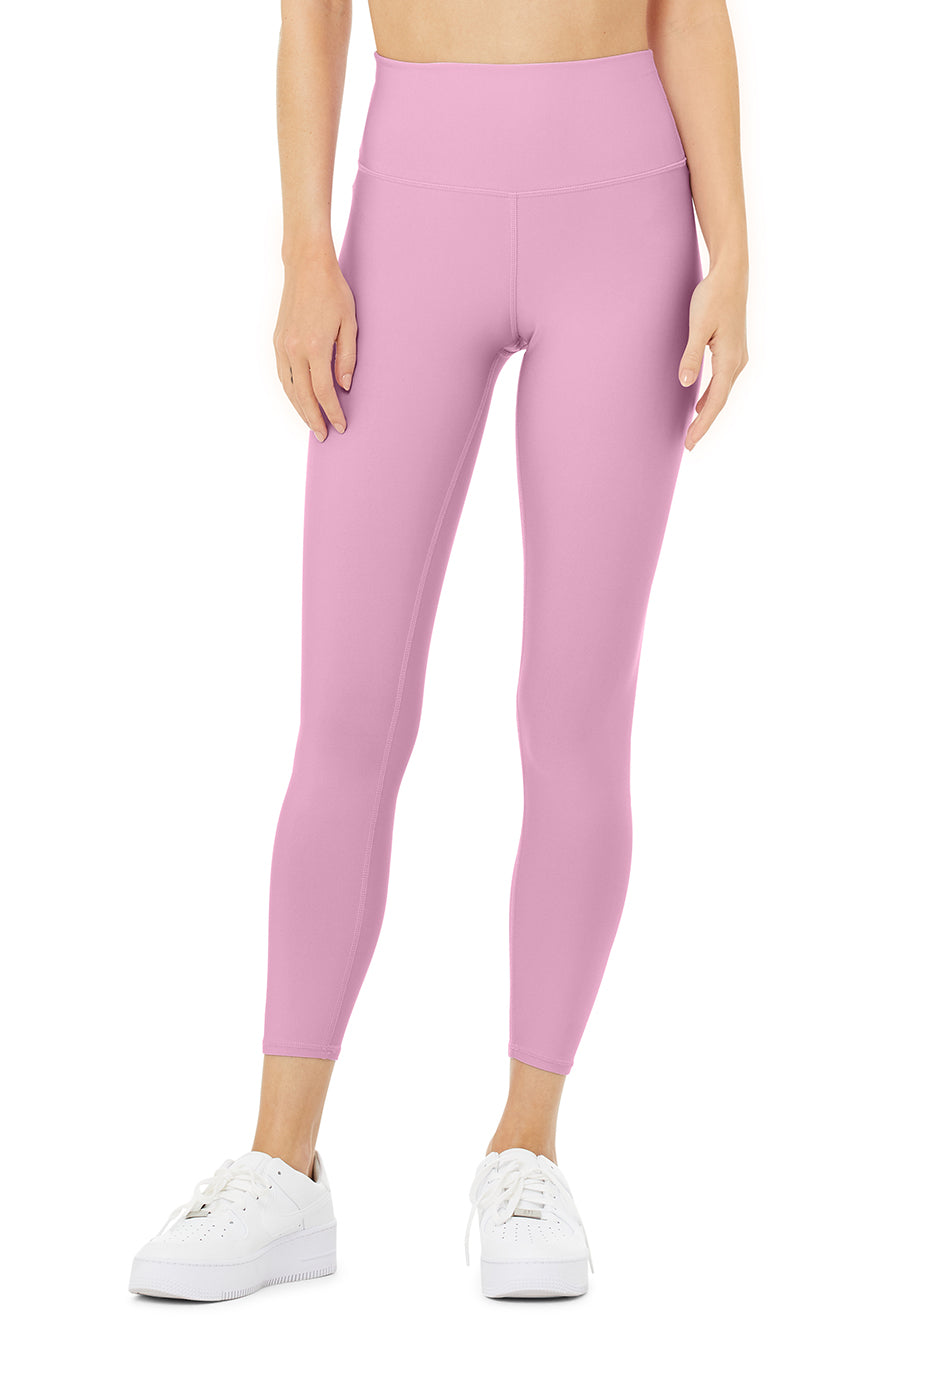 7/8 High-Waist Airlift Legging in Pink Lavender by Alo Yoga